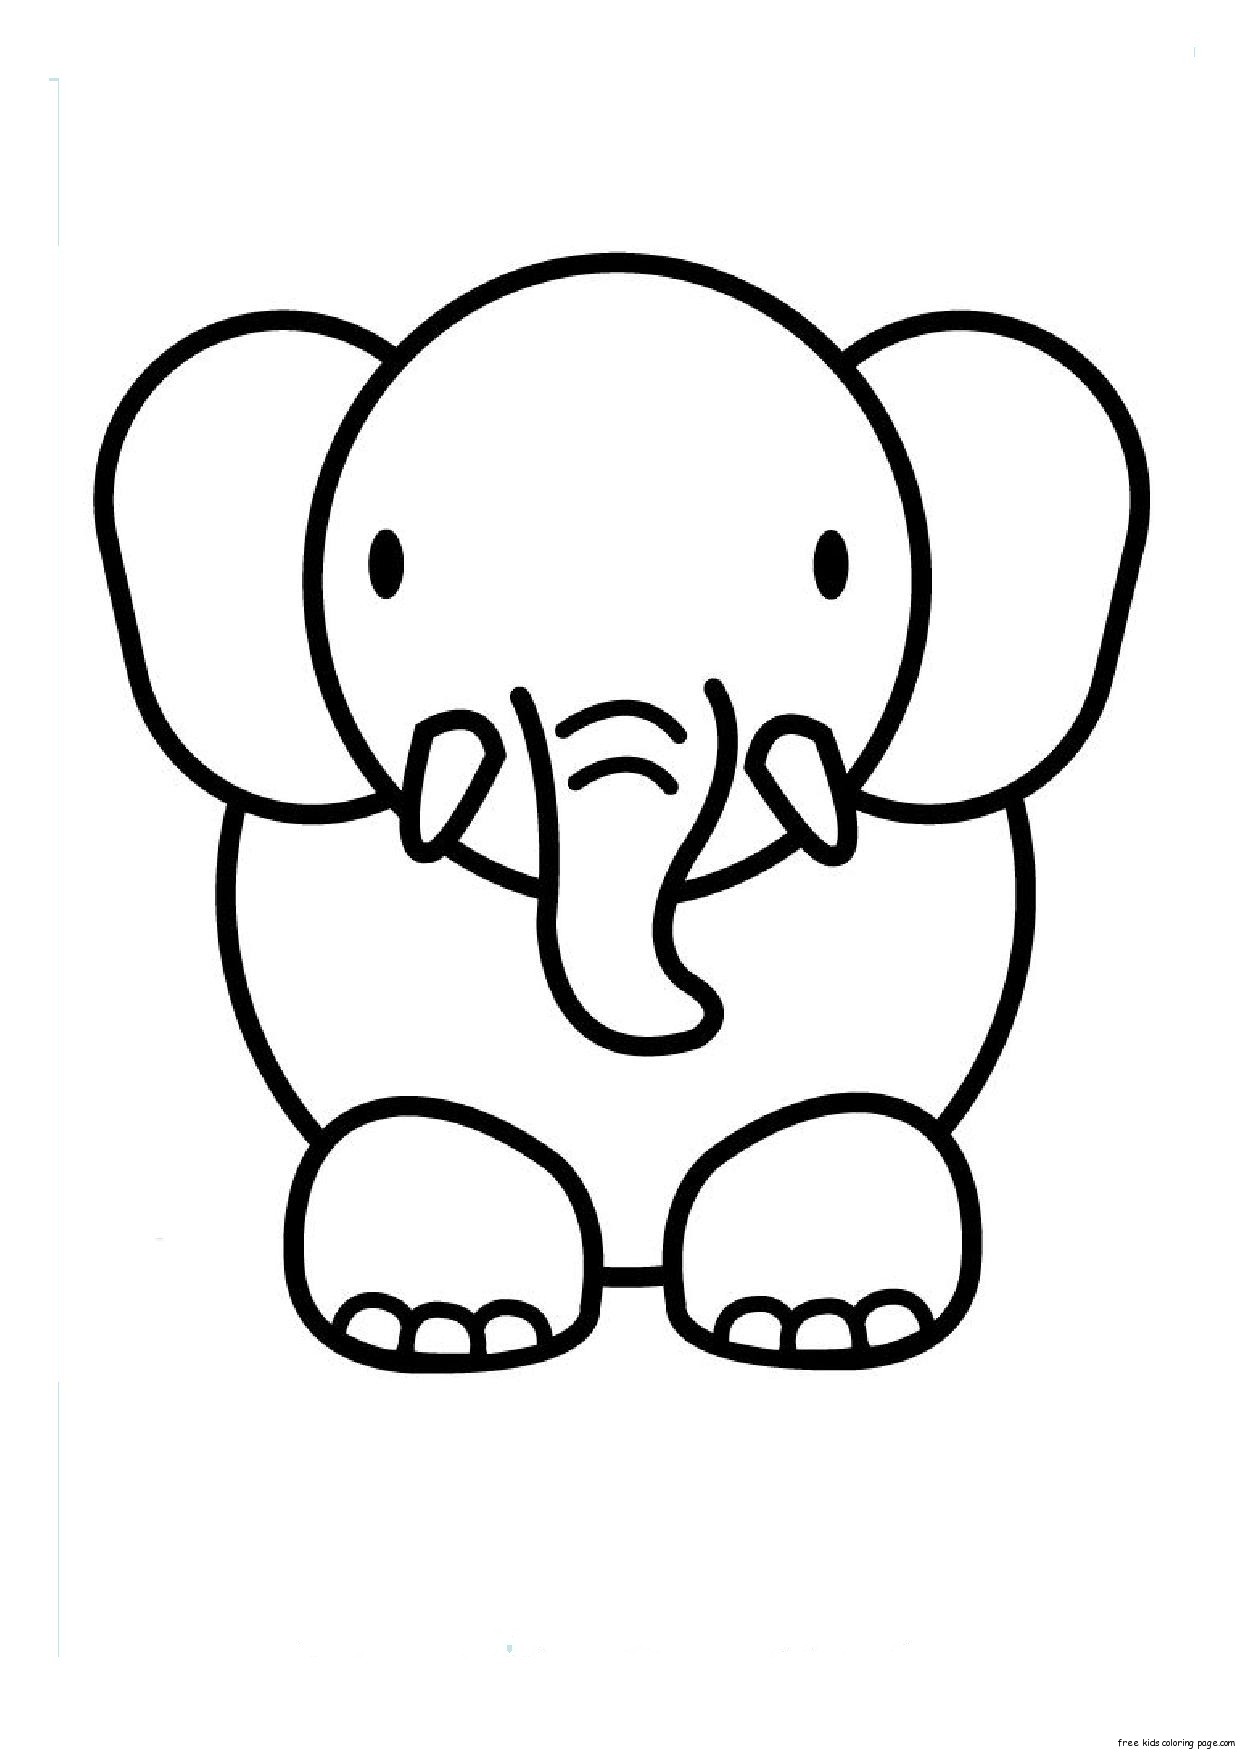 20+ images about Coloring Pages   Animal coloring ...   ClipArt ...